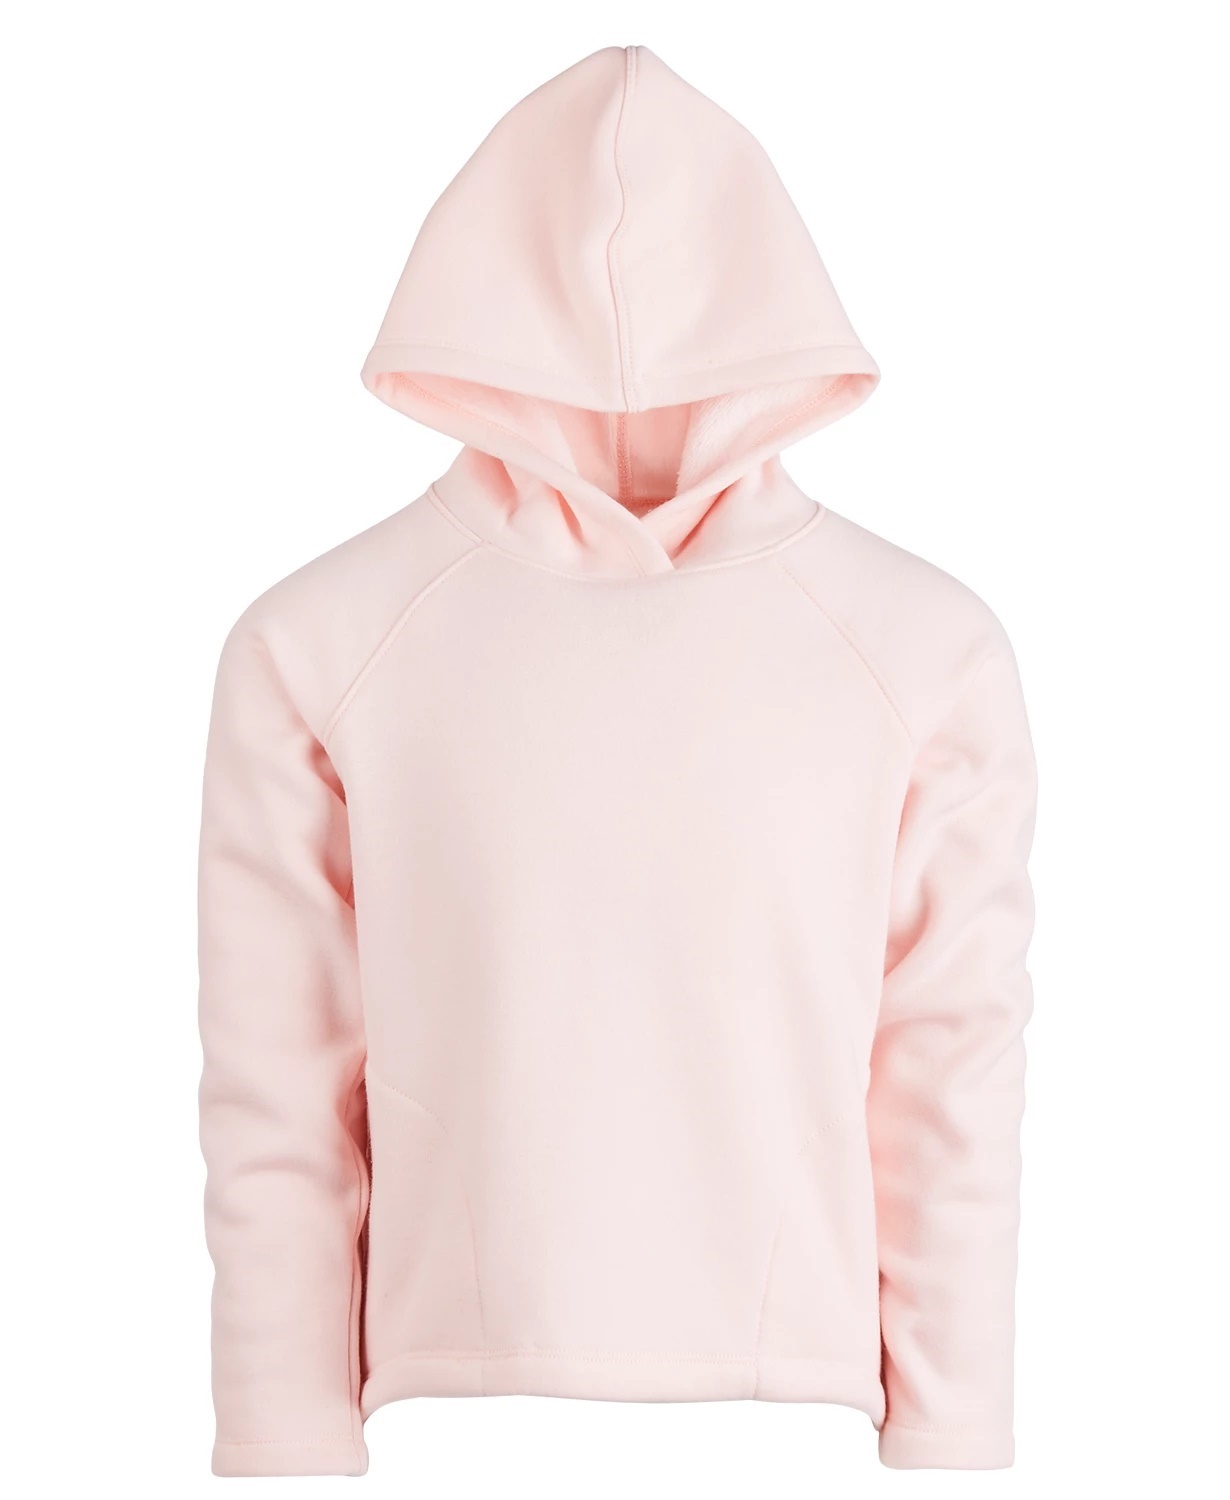 Ideology Toddler Girls Solid Hoodie Pink Size 2T